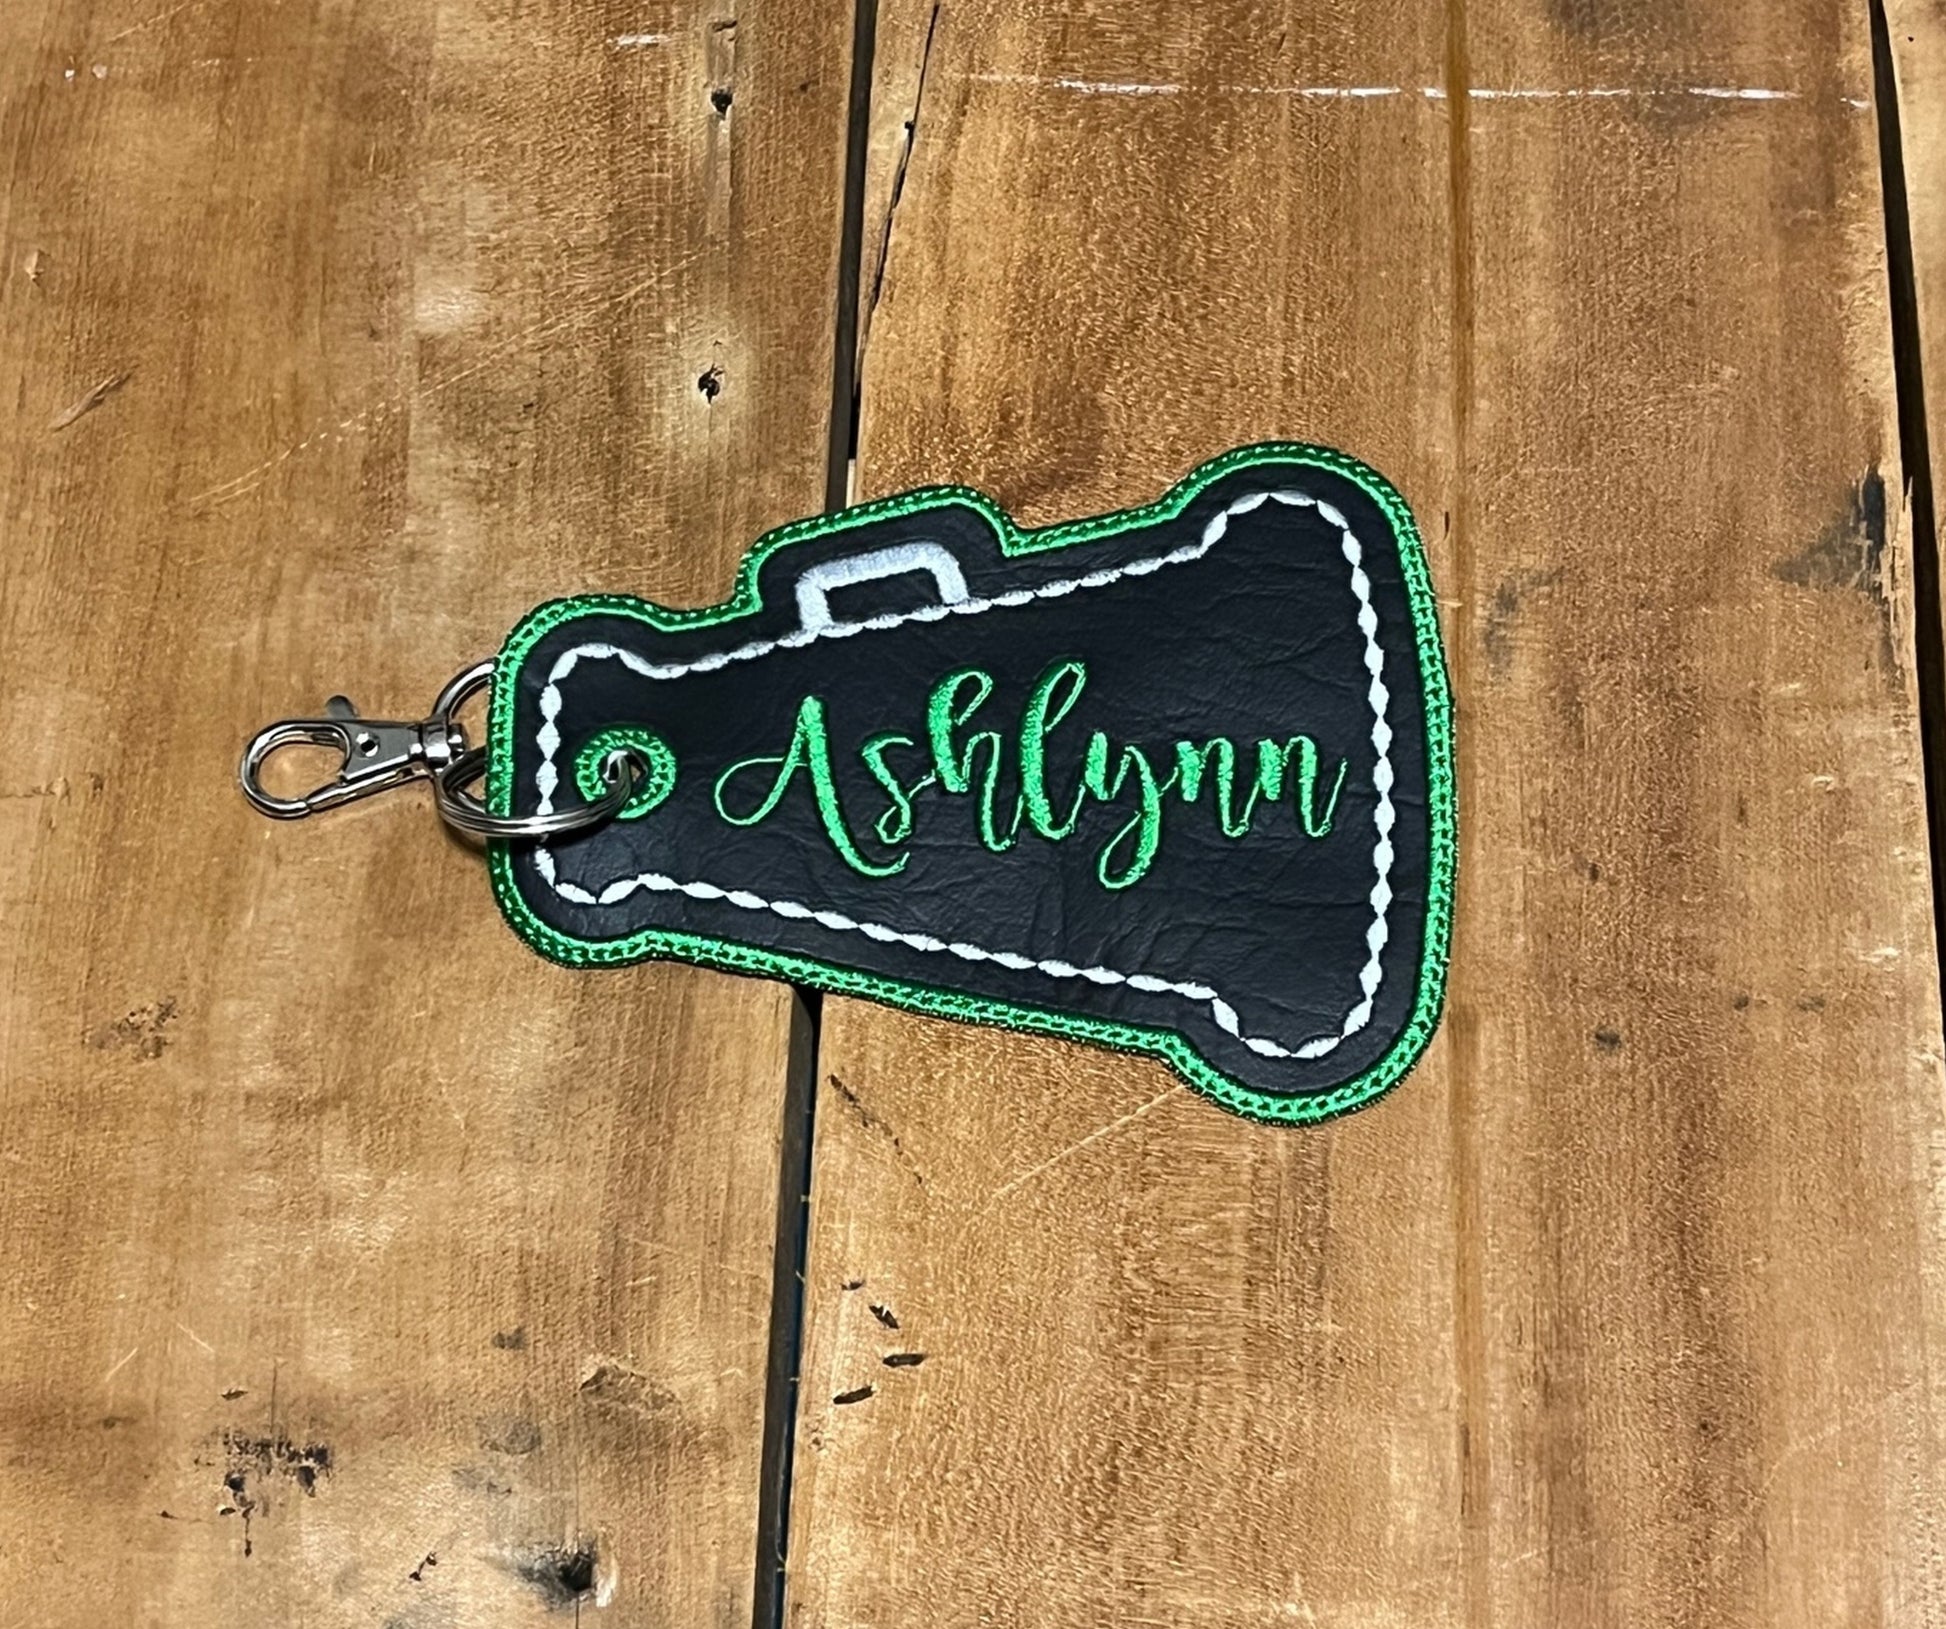 megaphone cheer bag tag shown in black, silver, and green. Can be personalized with your choice of colors, and name